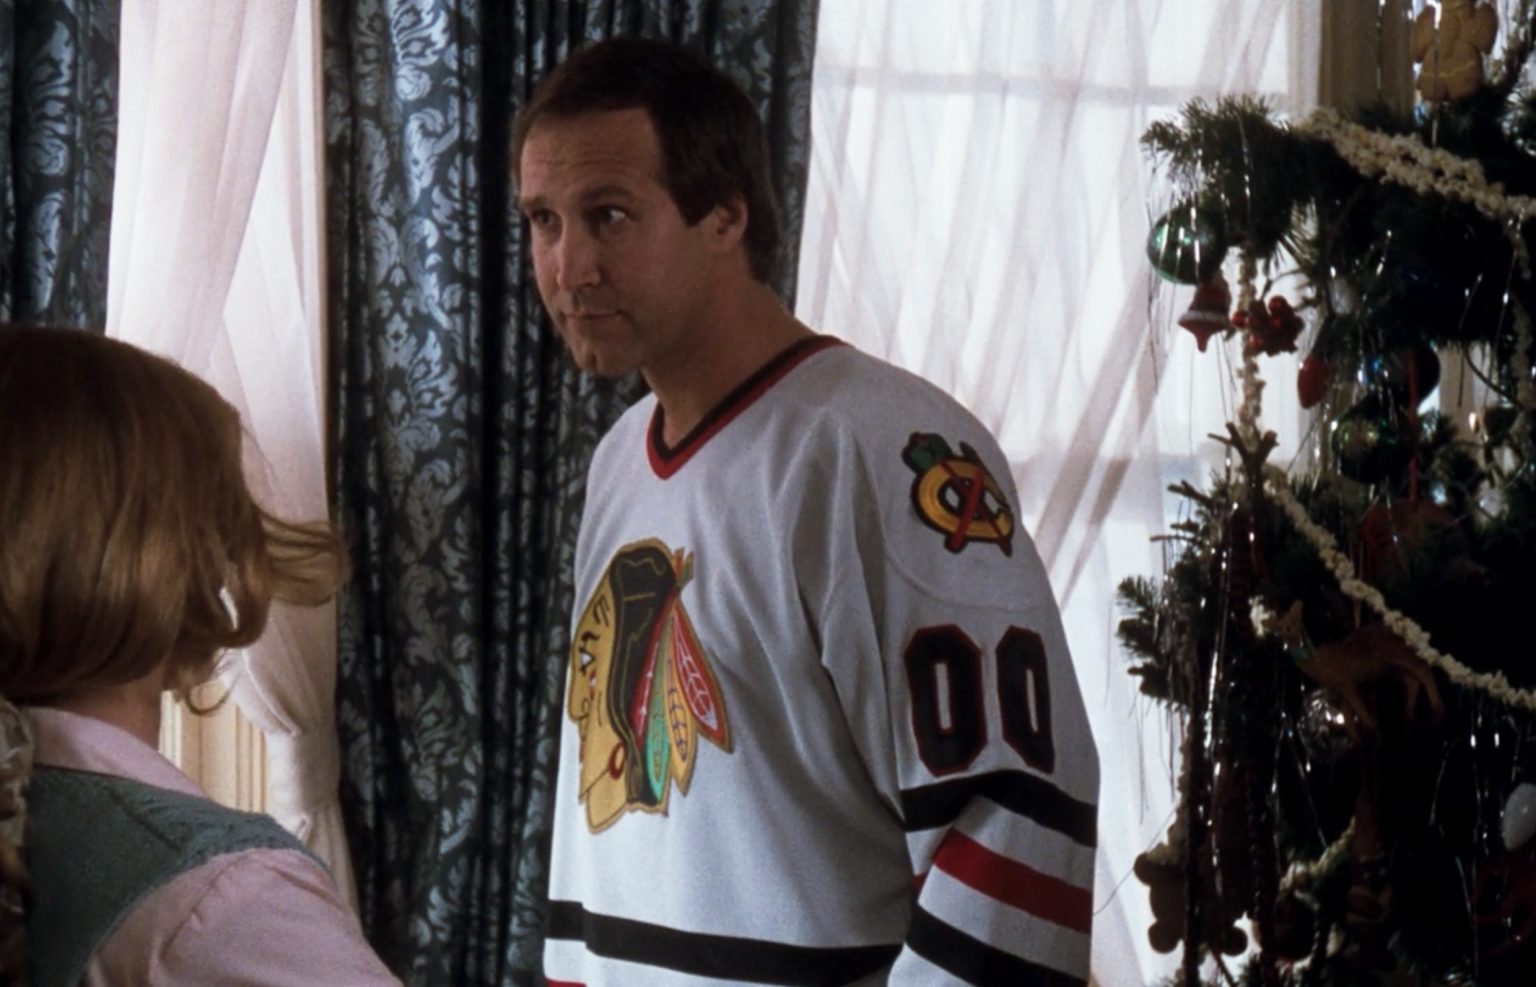 National Lampoon’s Christmas Vacation: Chicago Blackhawks – T-Shirts On Screen